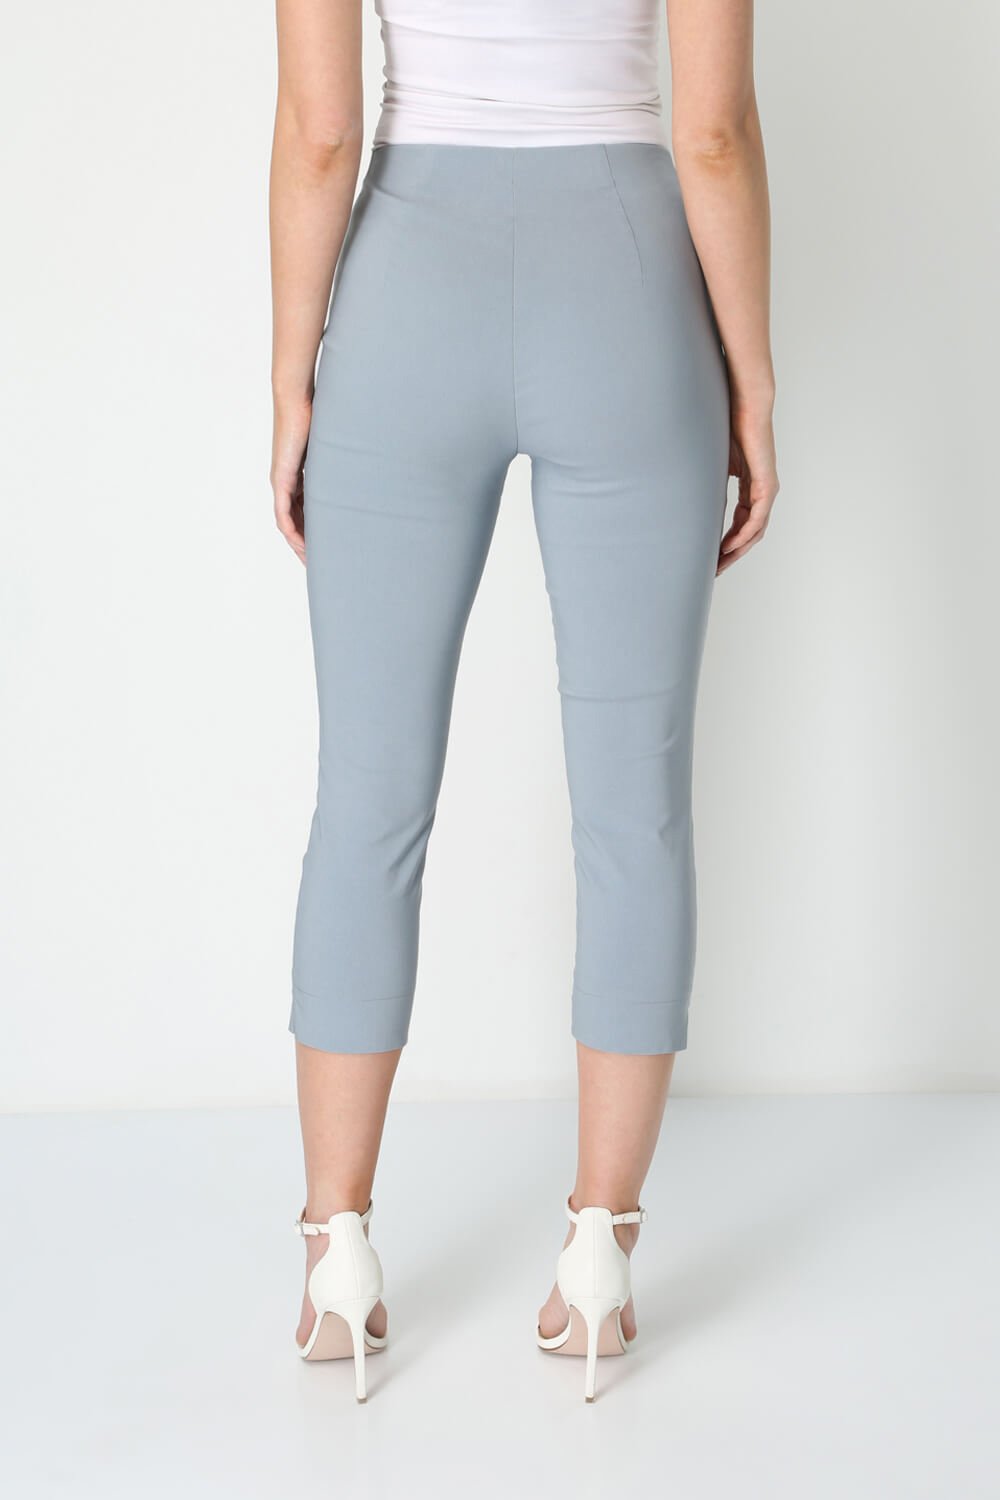 Grey Cropped Stretch Trouser, Image 2 of 5